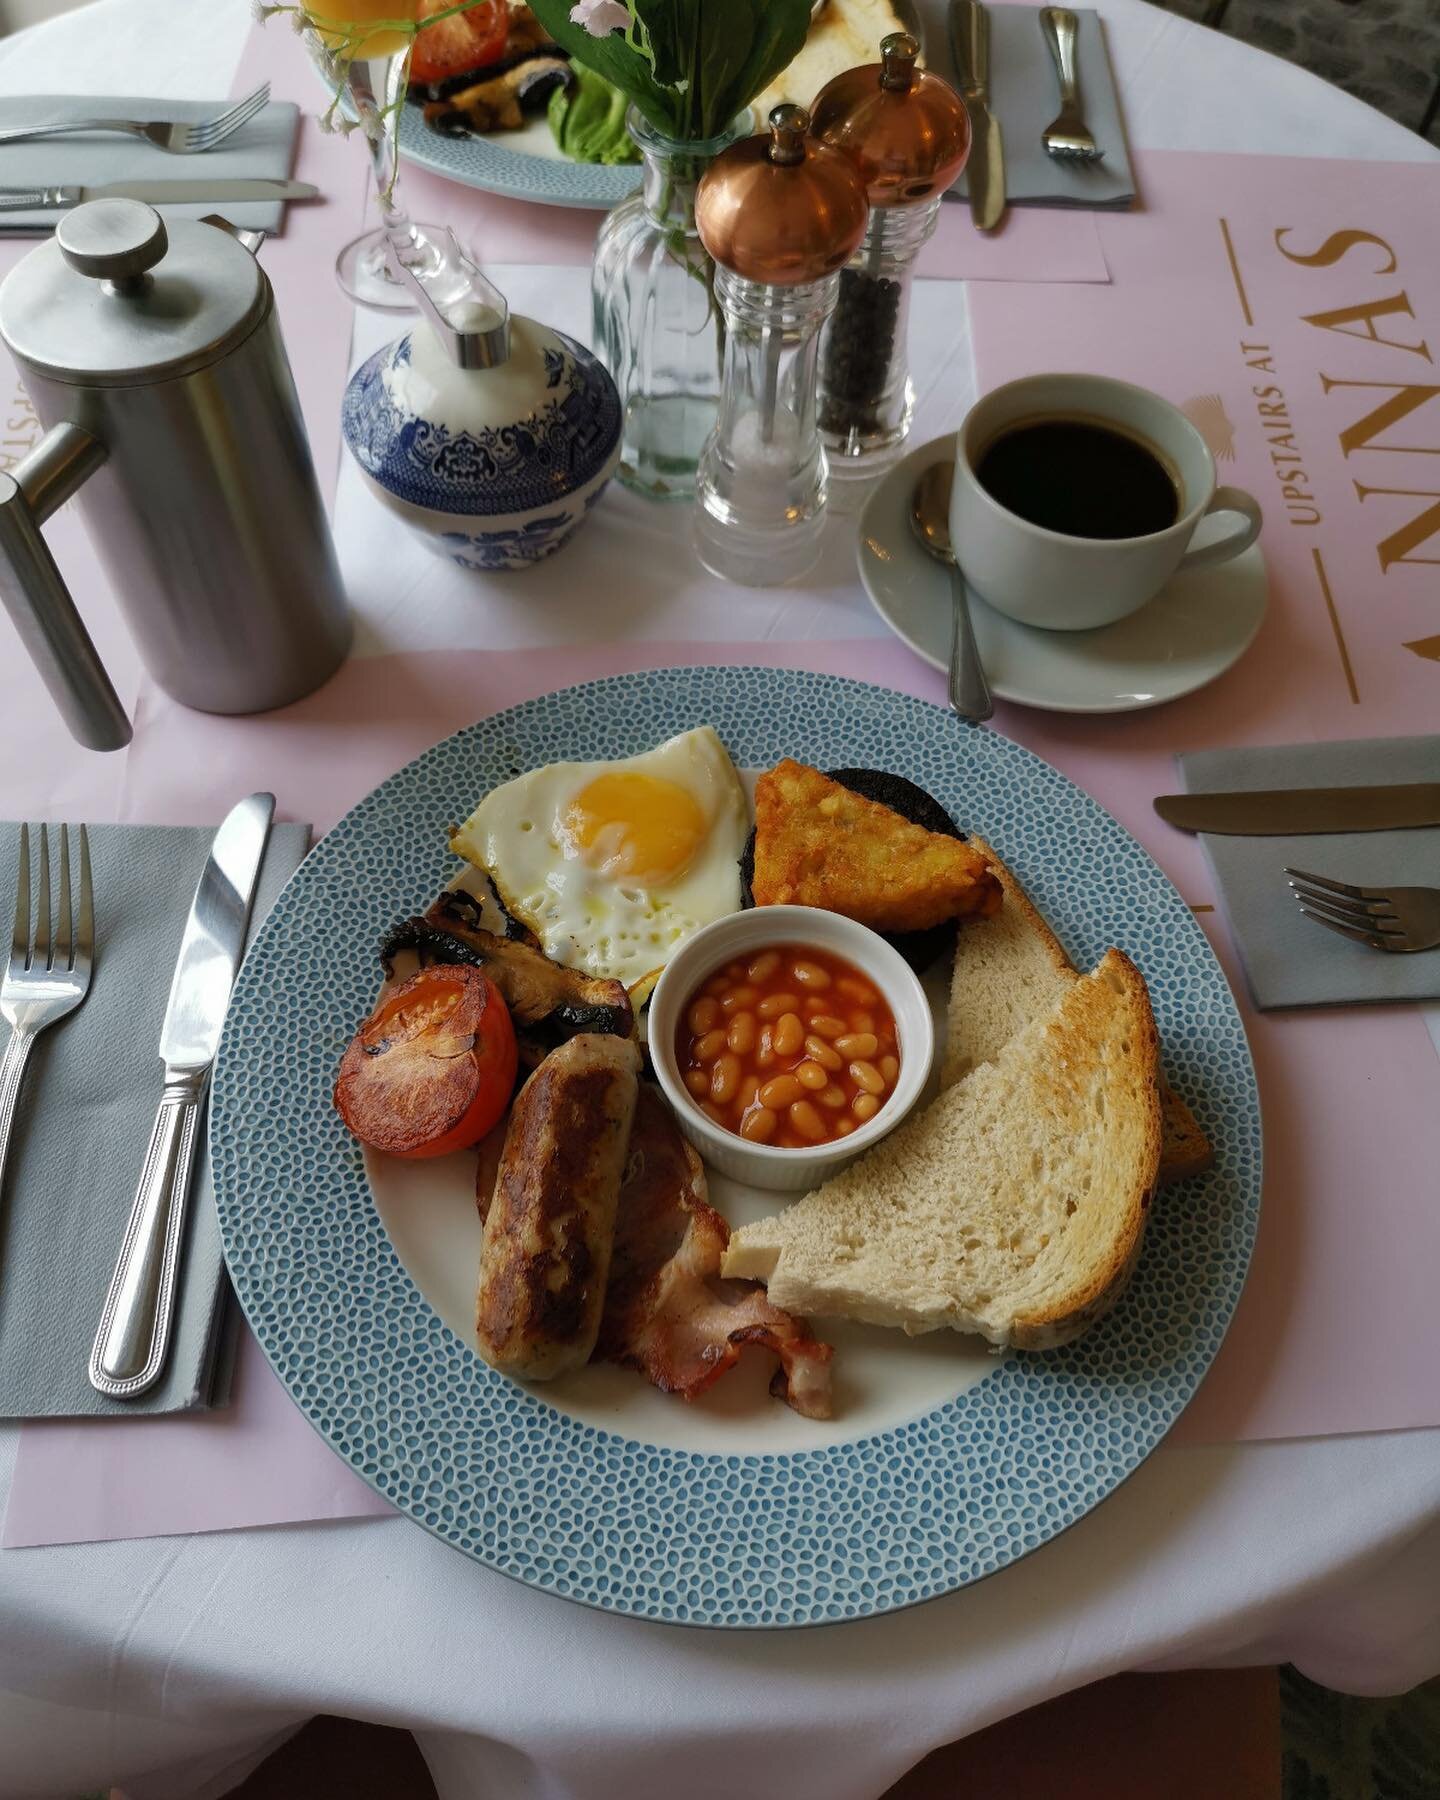 Wake up and smell the coffee ☕️ 

Breakfast is served from 9:30am 

#goodmorning #breakfast #breakfastisserved #eggs #upstairsatannas #conwy #conwycastle #northwales #wales